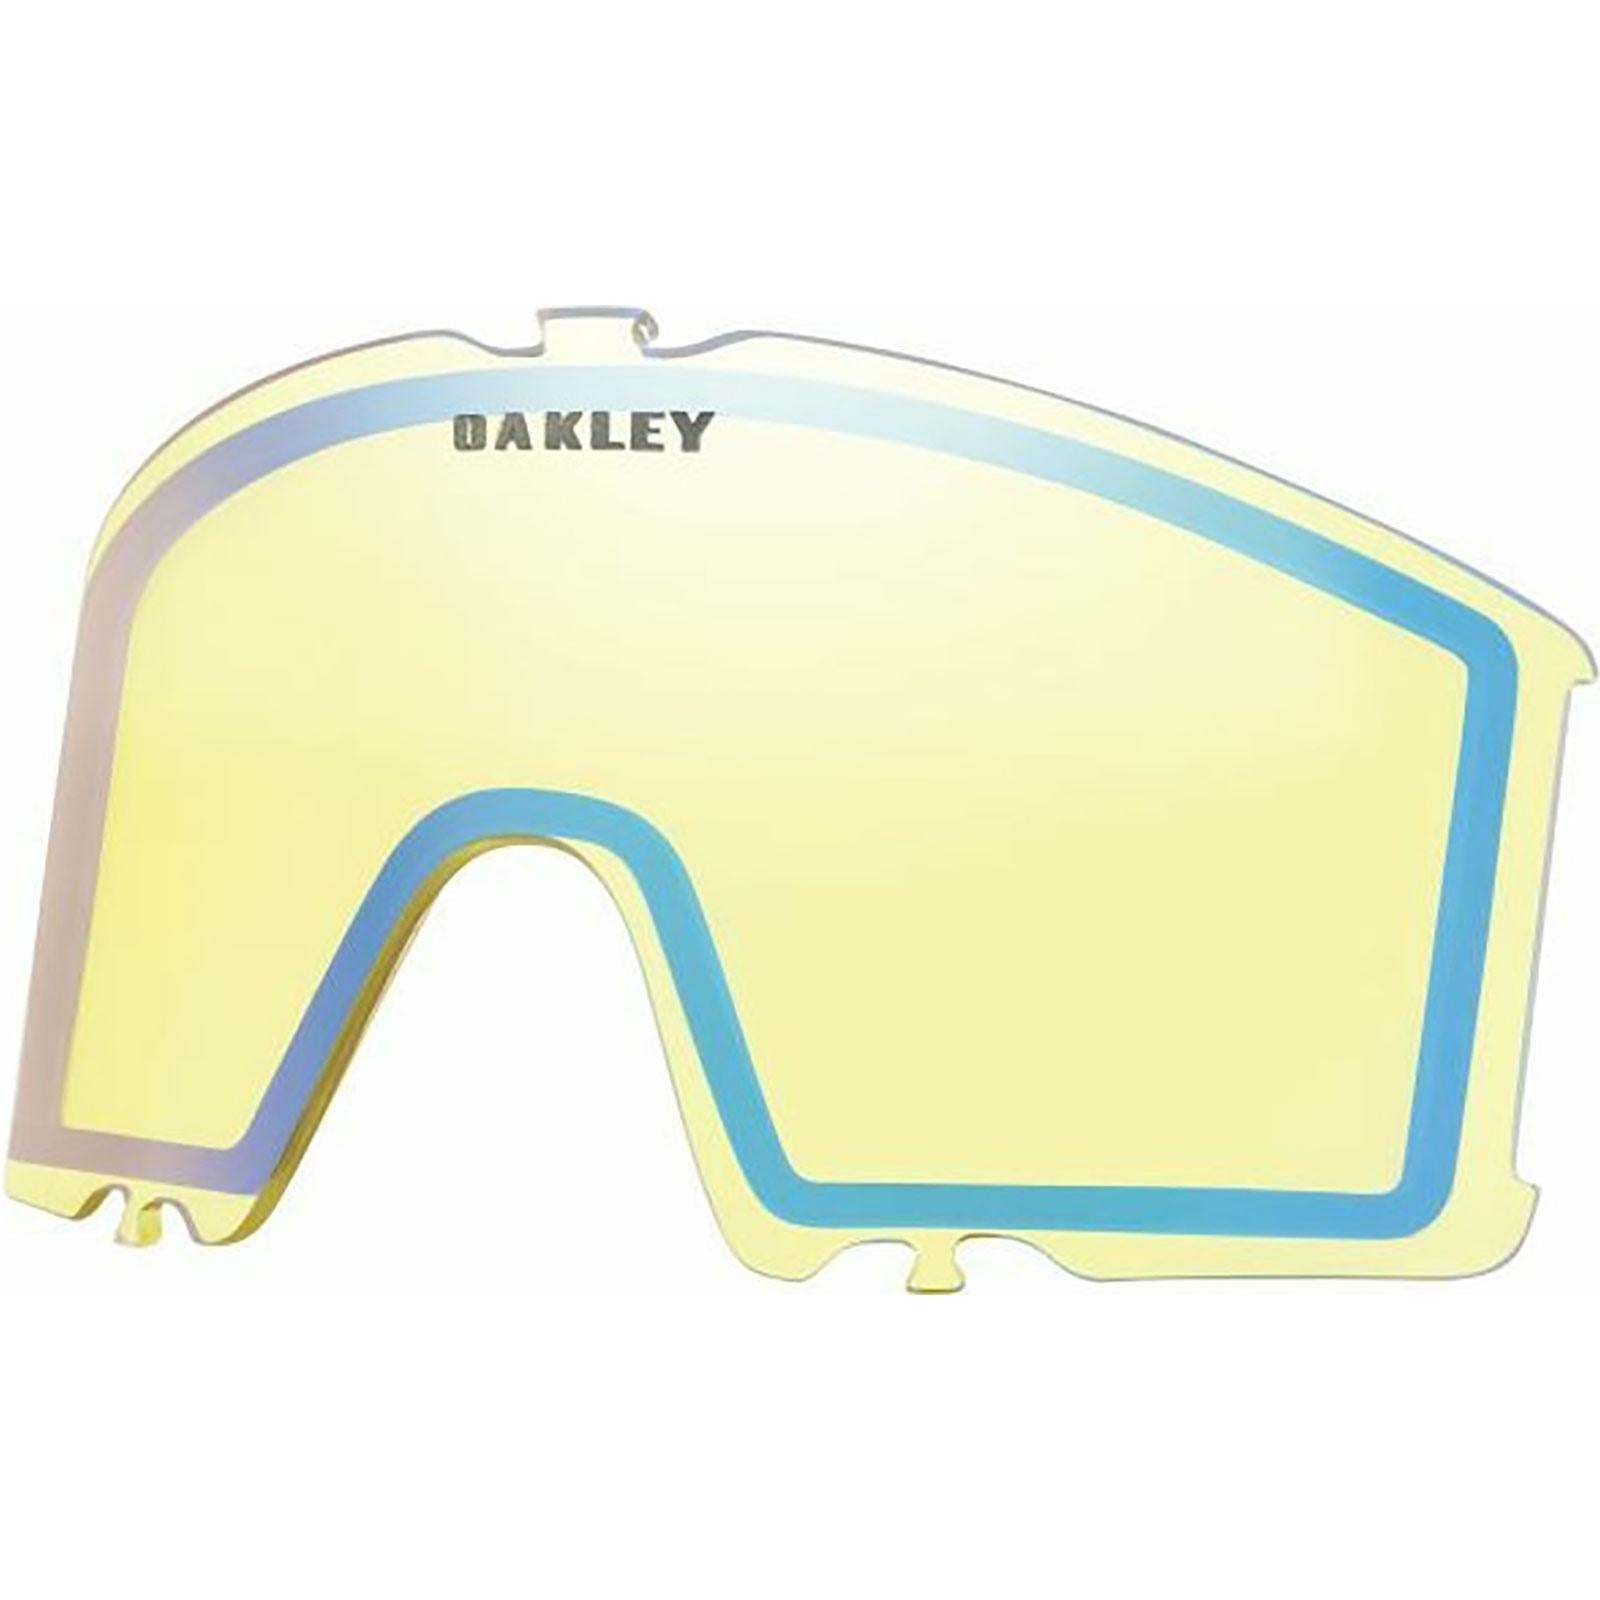 Oakley Target Line S Replacement Lens Goggles Accessories-AOO7122LS